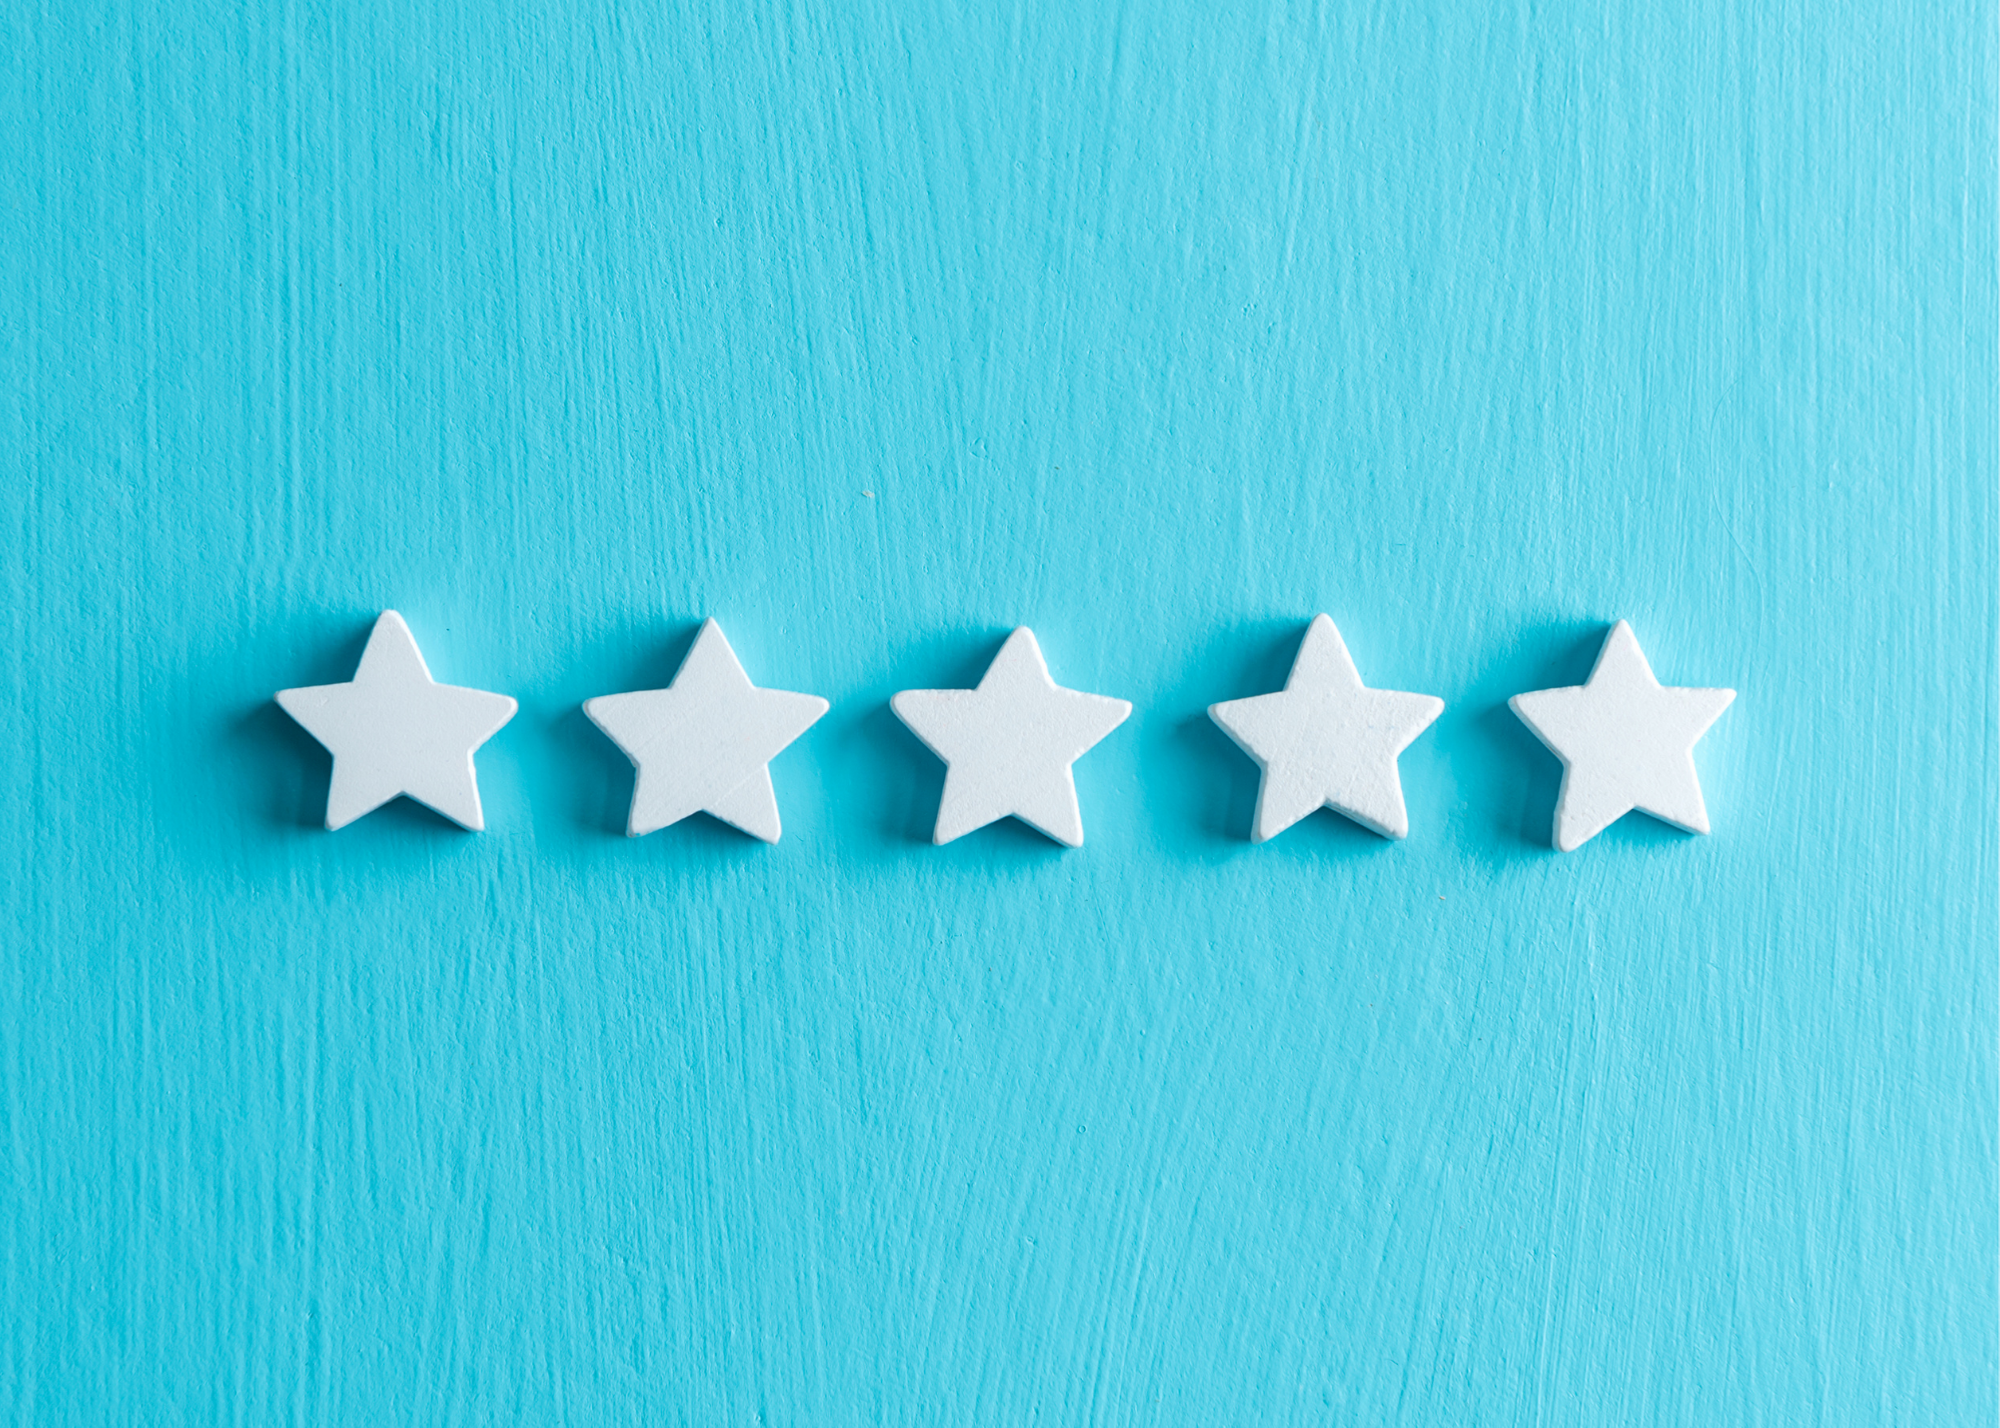 Stakeholders Provide Feedback to Changes in CMS Hospital Star Ratings